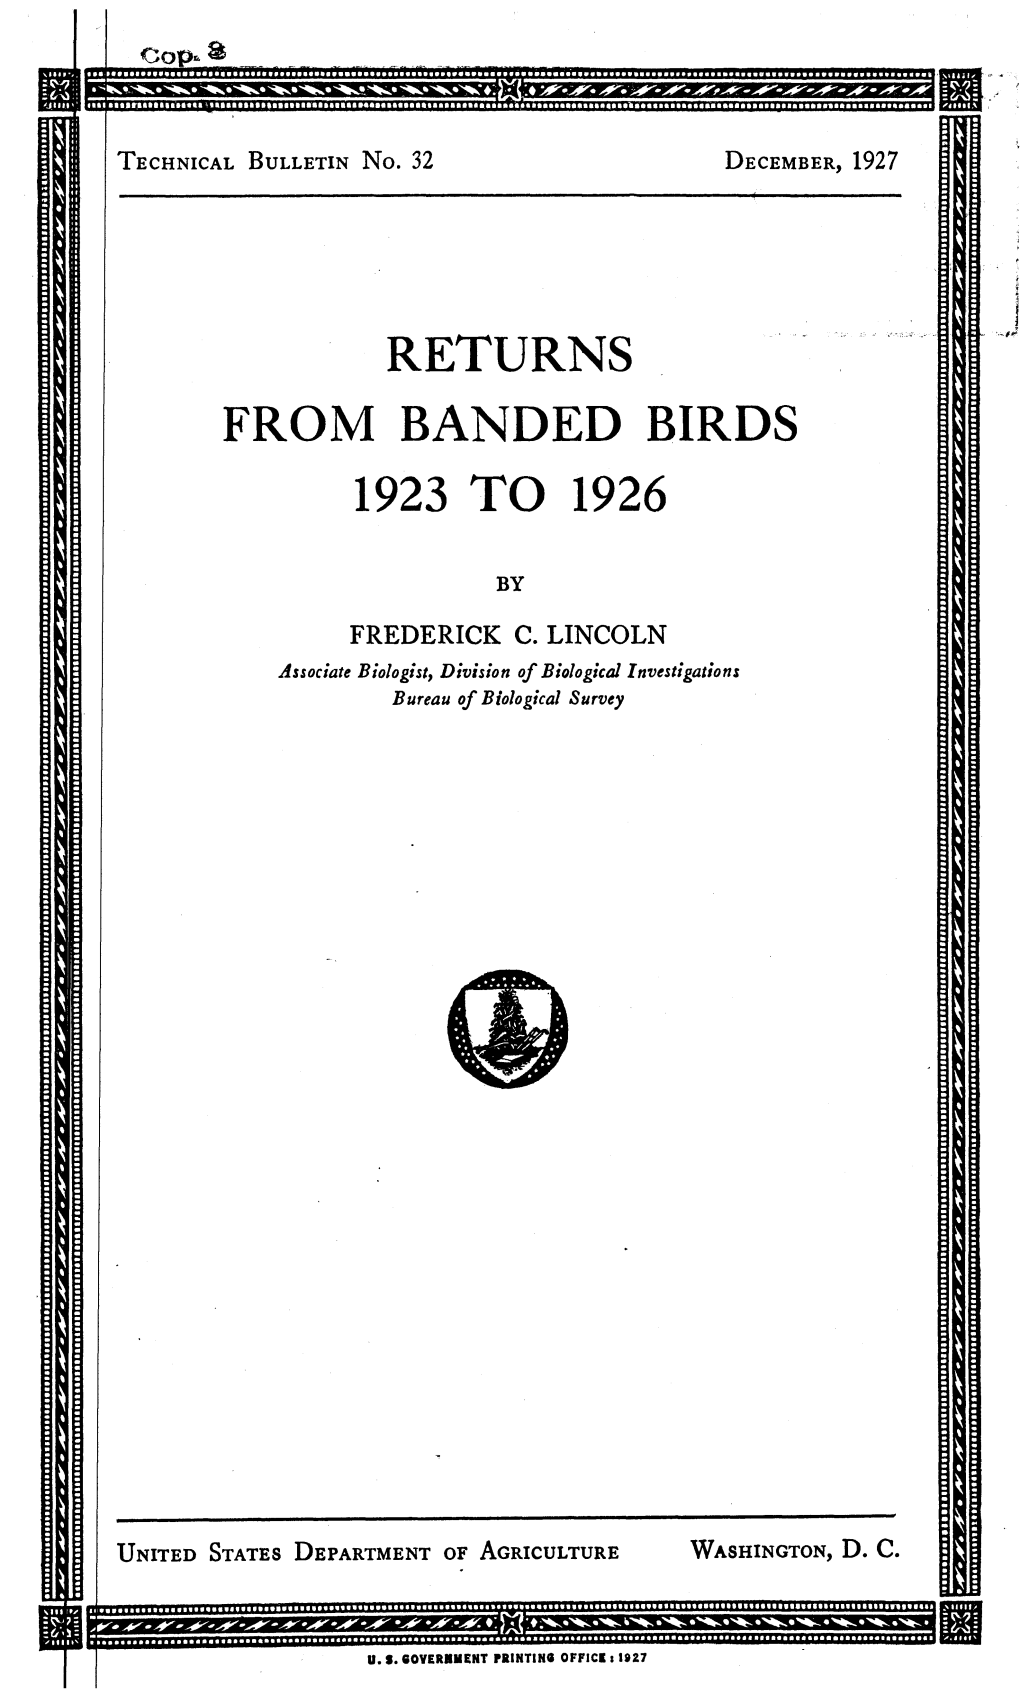 Returns from Banded Birds 1923 to 1926